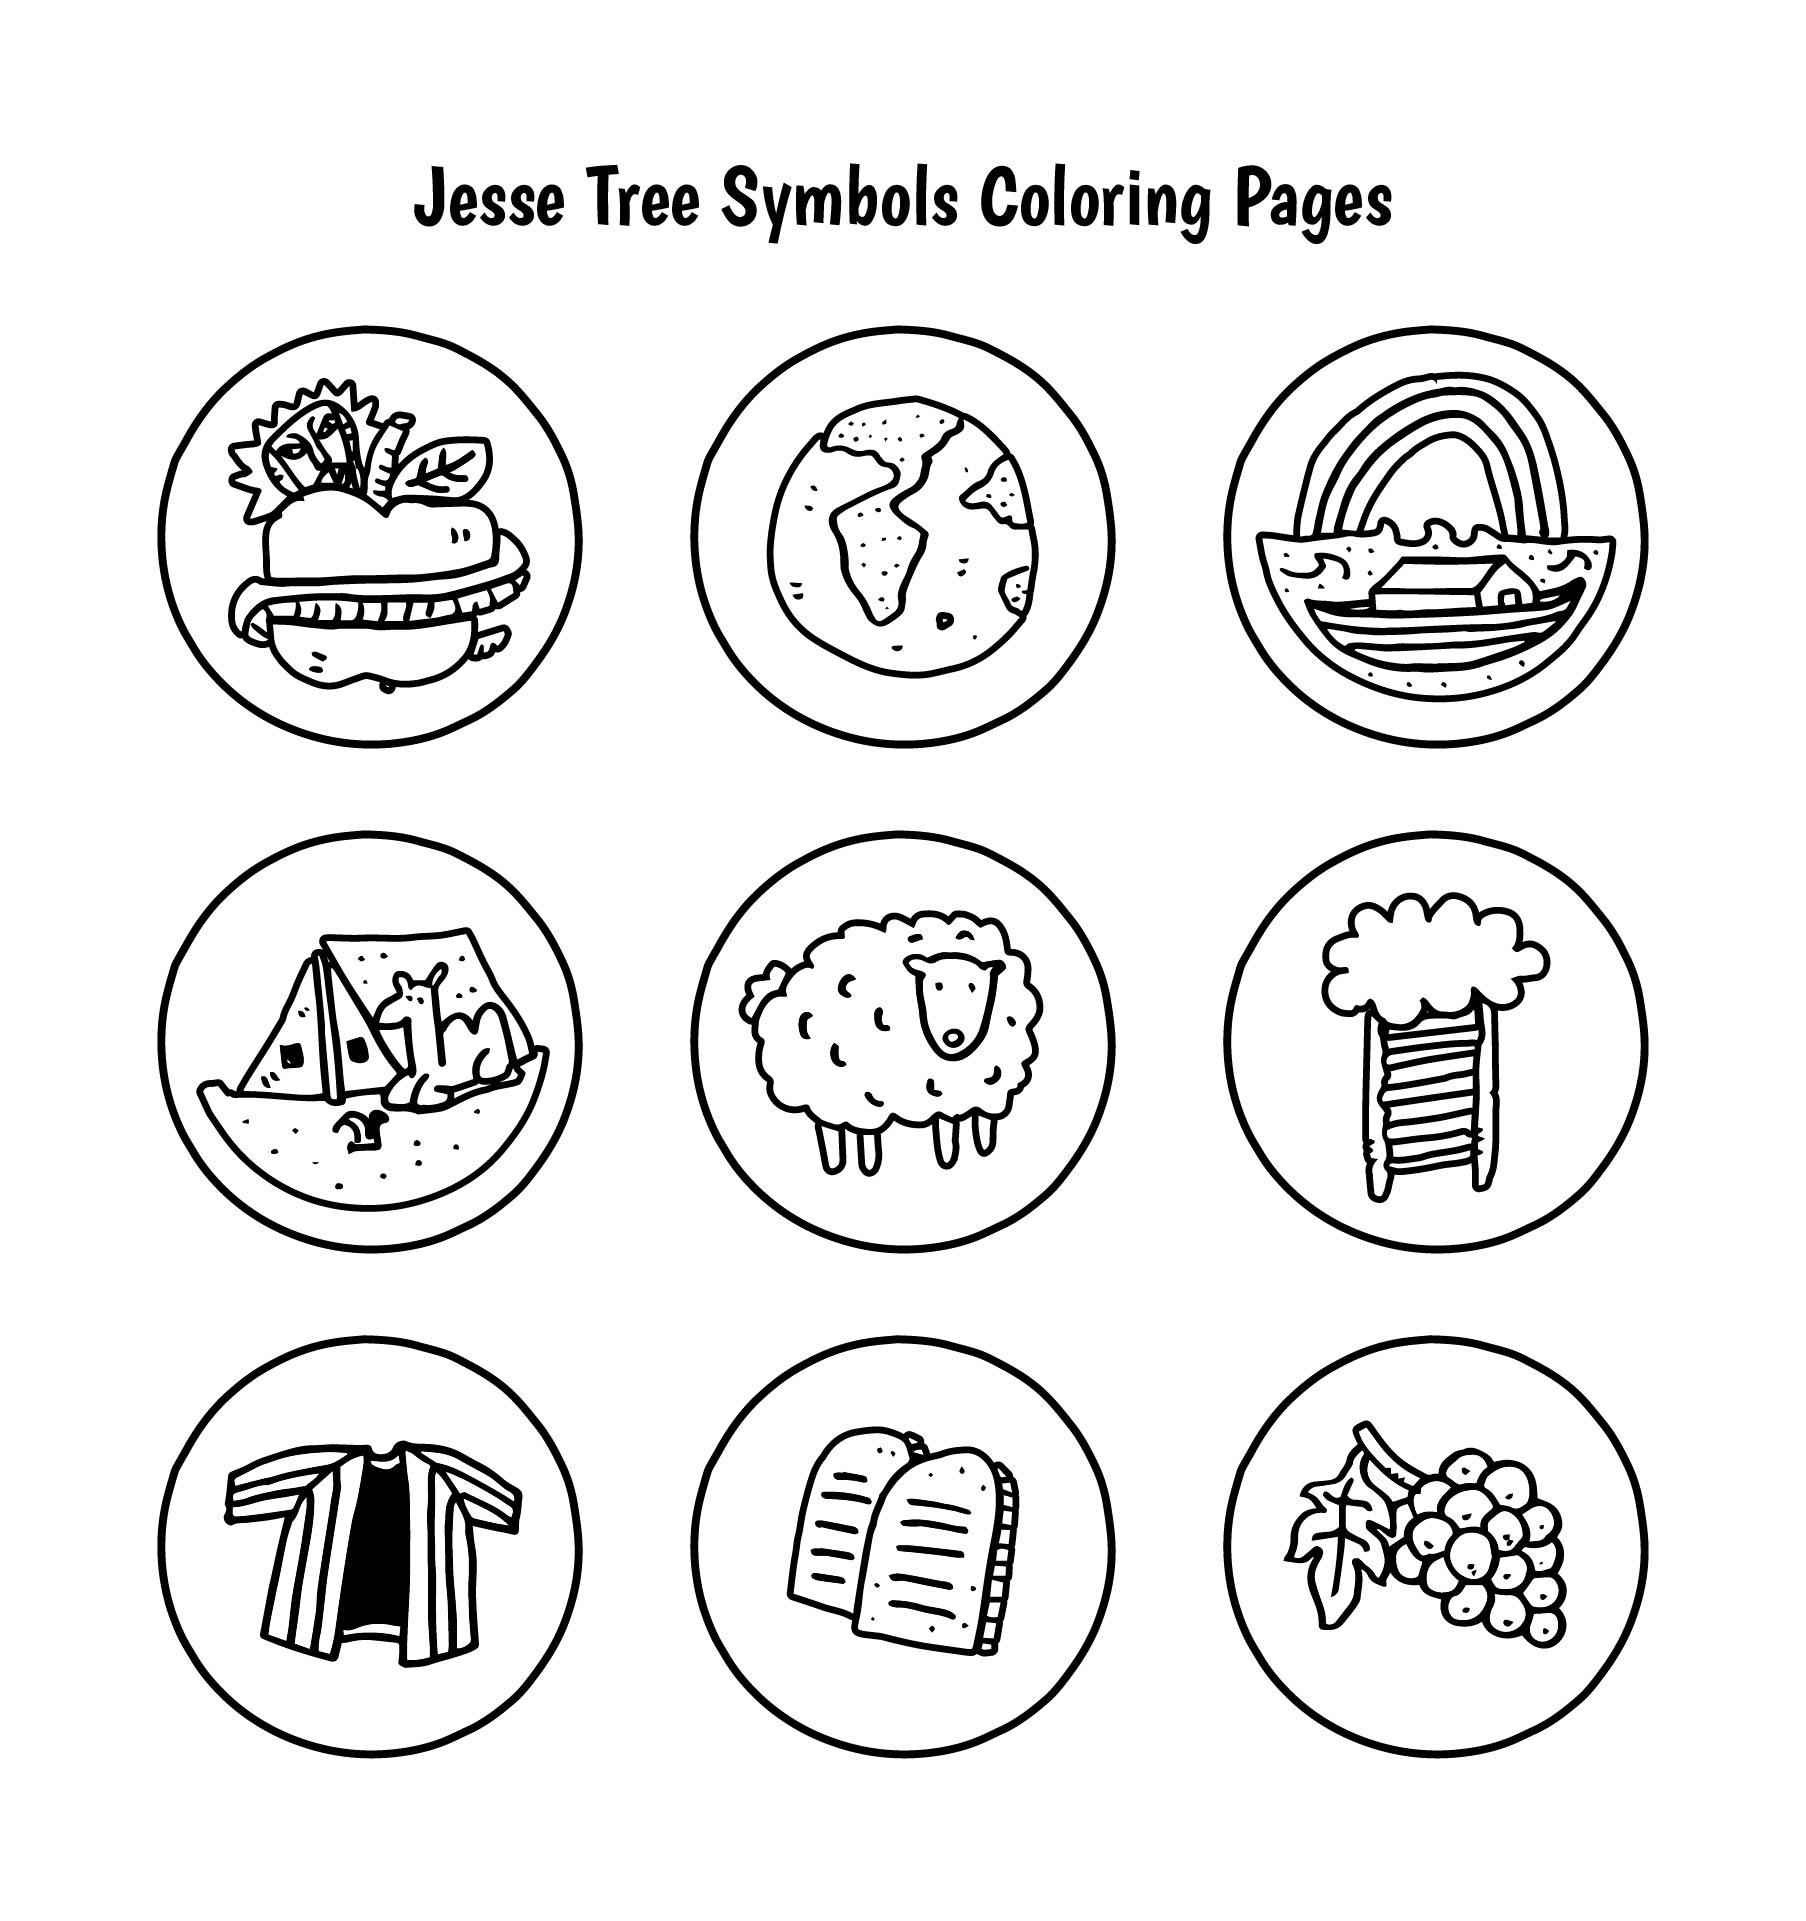 The Jesse Tree Coloring Pages